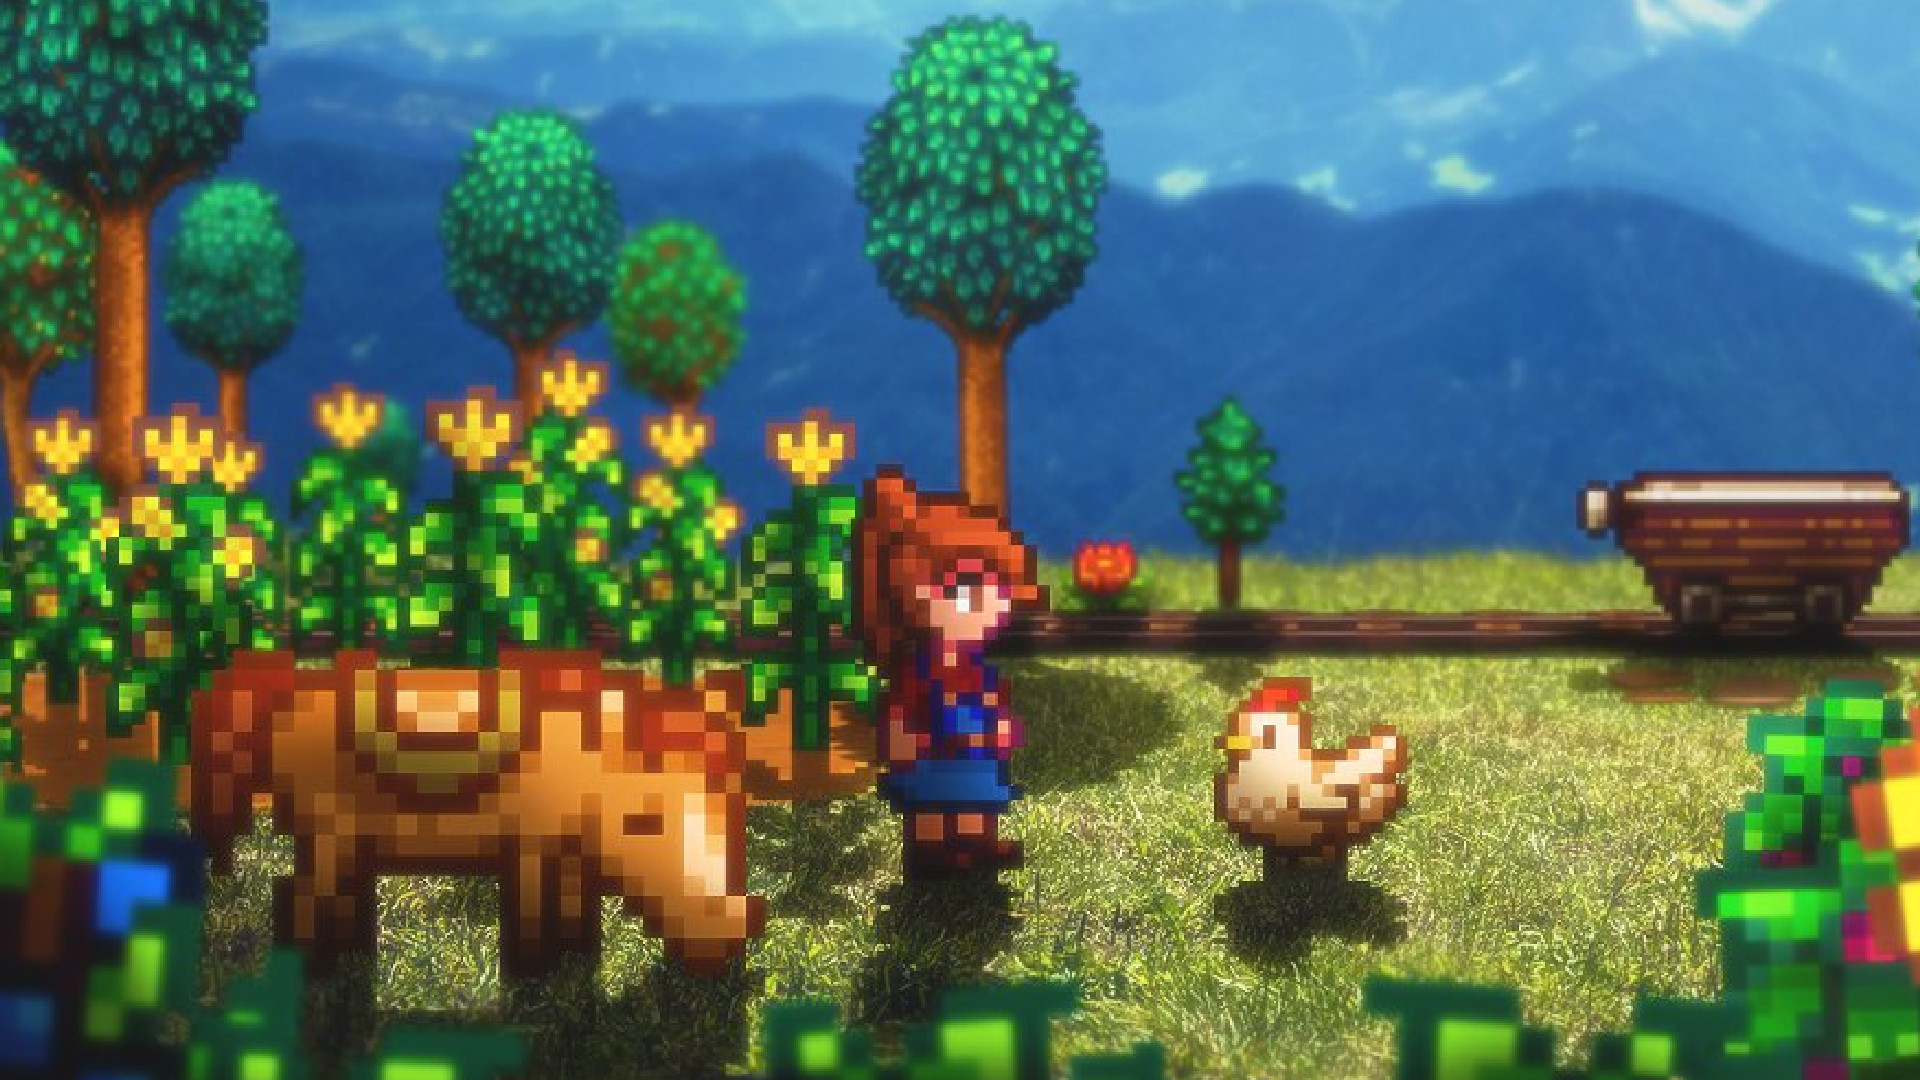  Eric Barone quietly reveals new Stardew Valley update that's a game changer for honey farming: Life will never 'bee' the same 